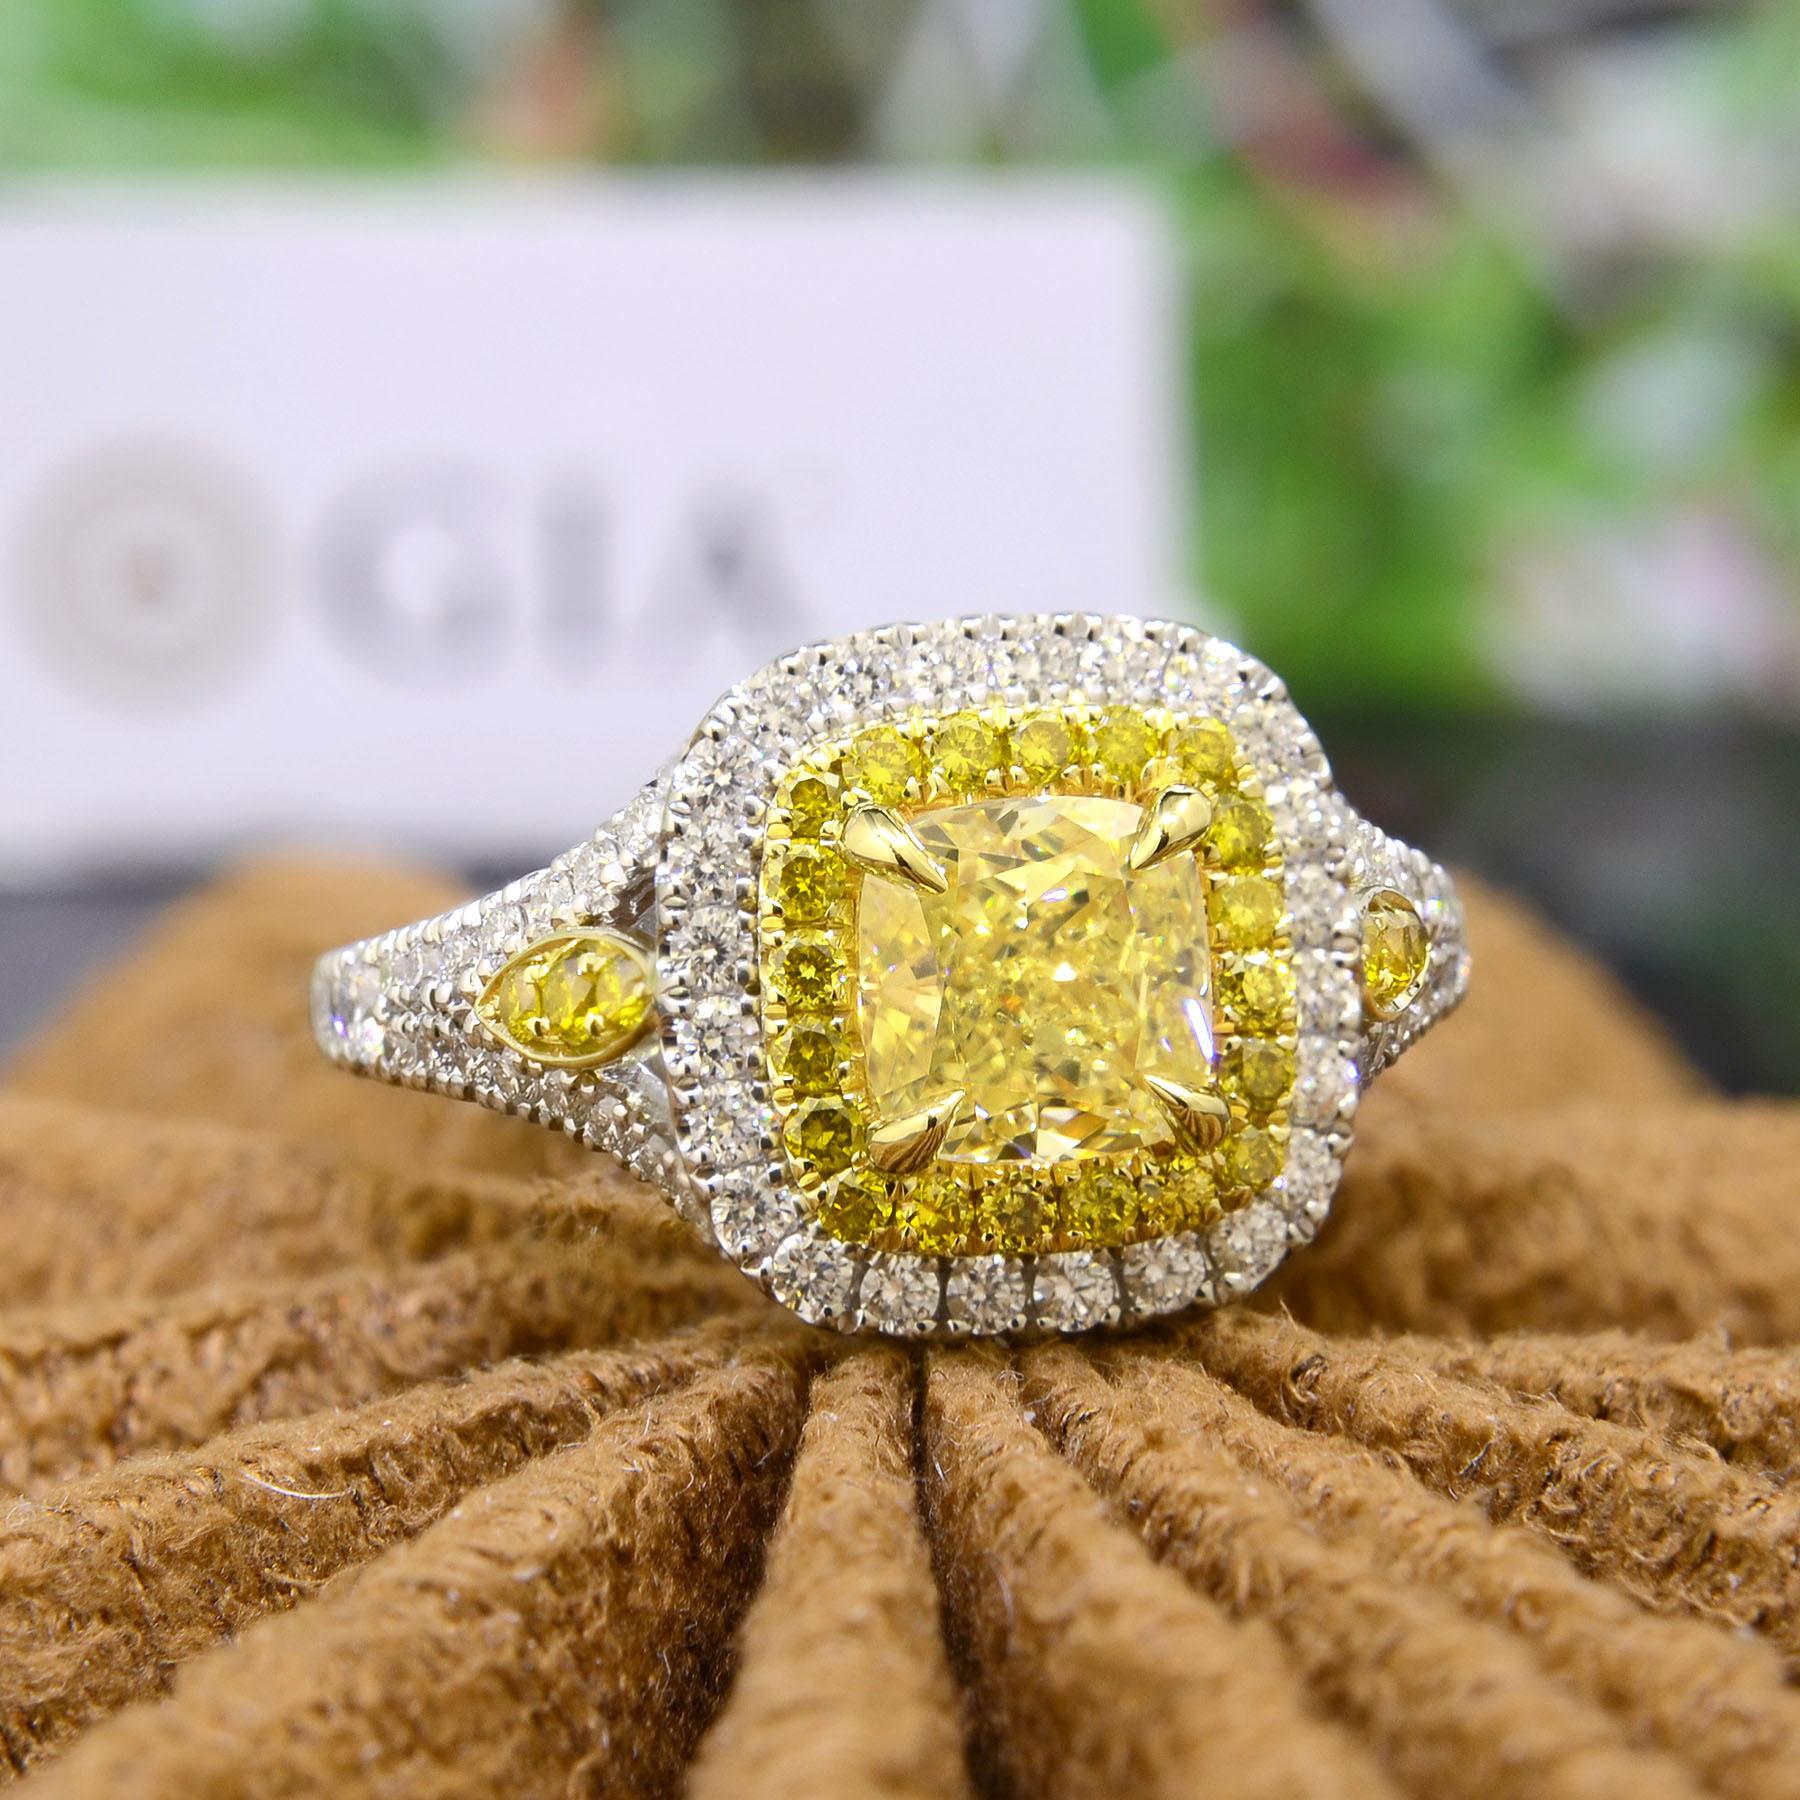 This dual halo diamond ring is created with a cushion cut yellow diamond center stone elaborately framed by round cut canary and white diamonds. The center stone is a lovely 1.00 Ct. Cushion cut canary diamond with natural fancy yellow color grade